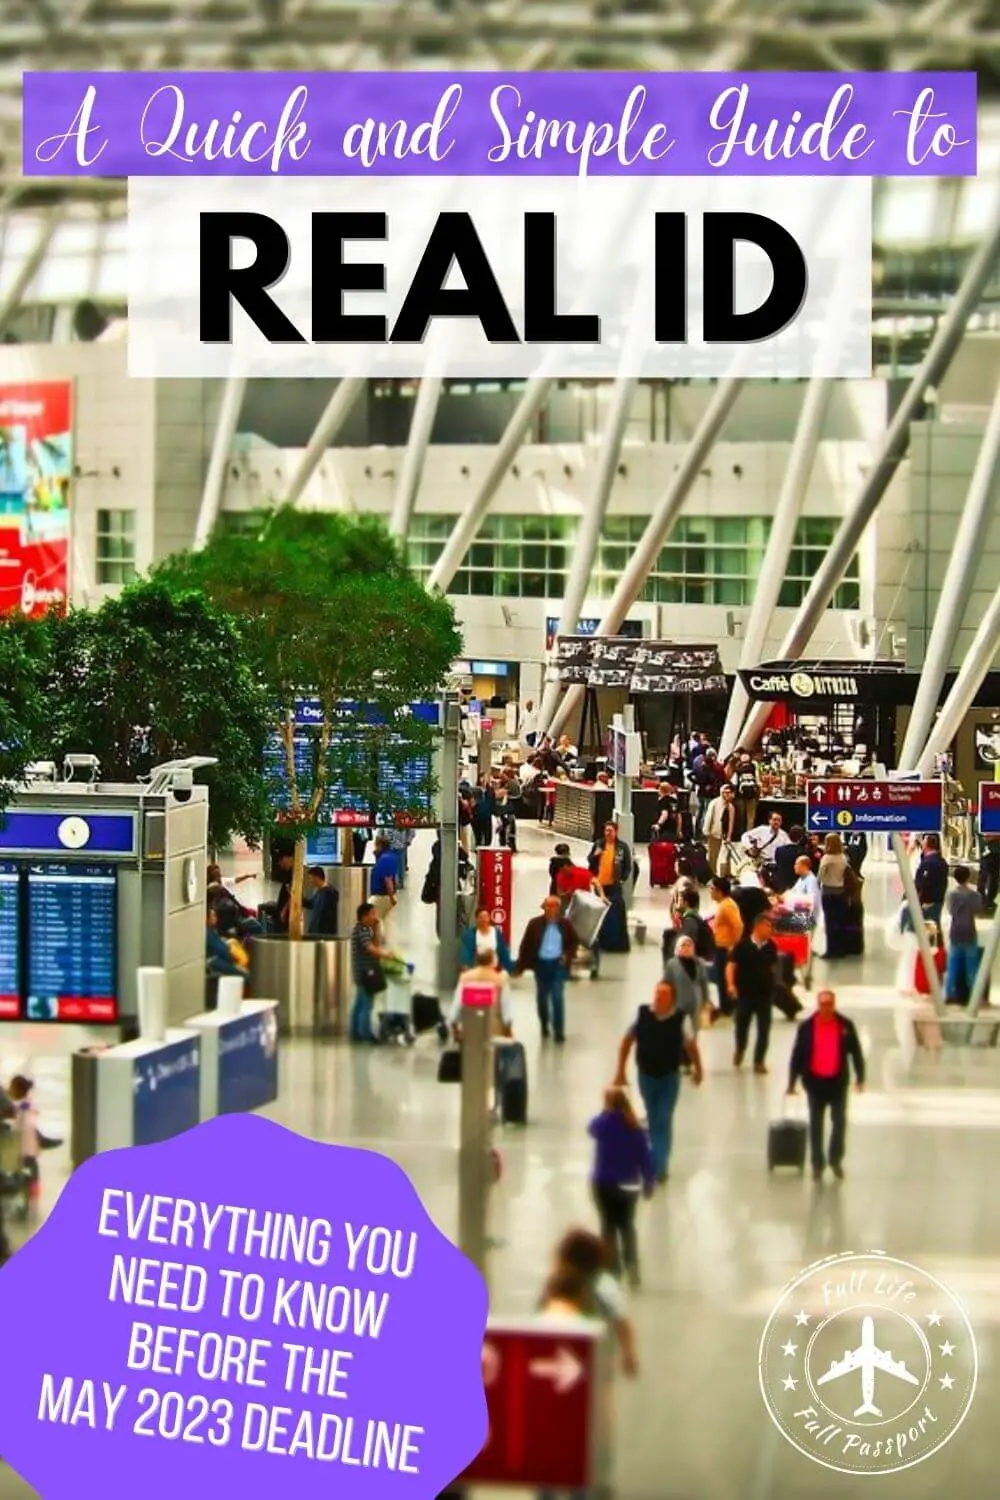 A Quick and Simple Guide to REAL ID